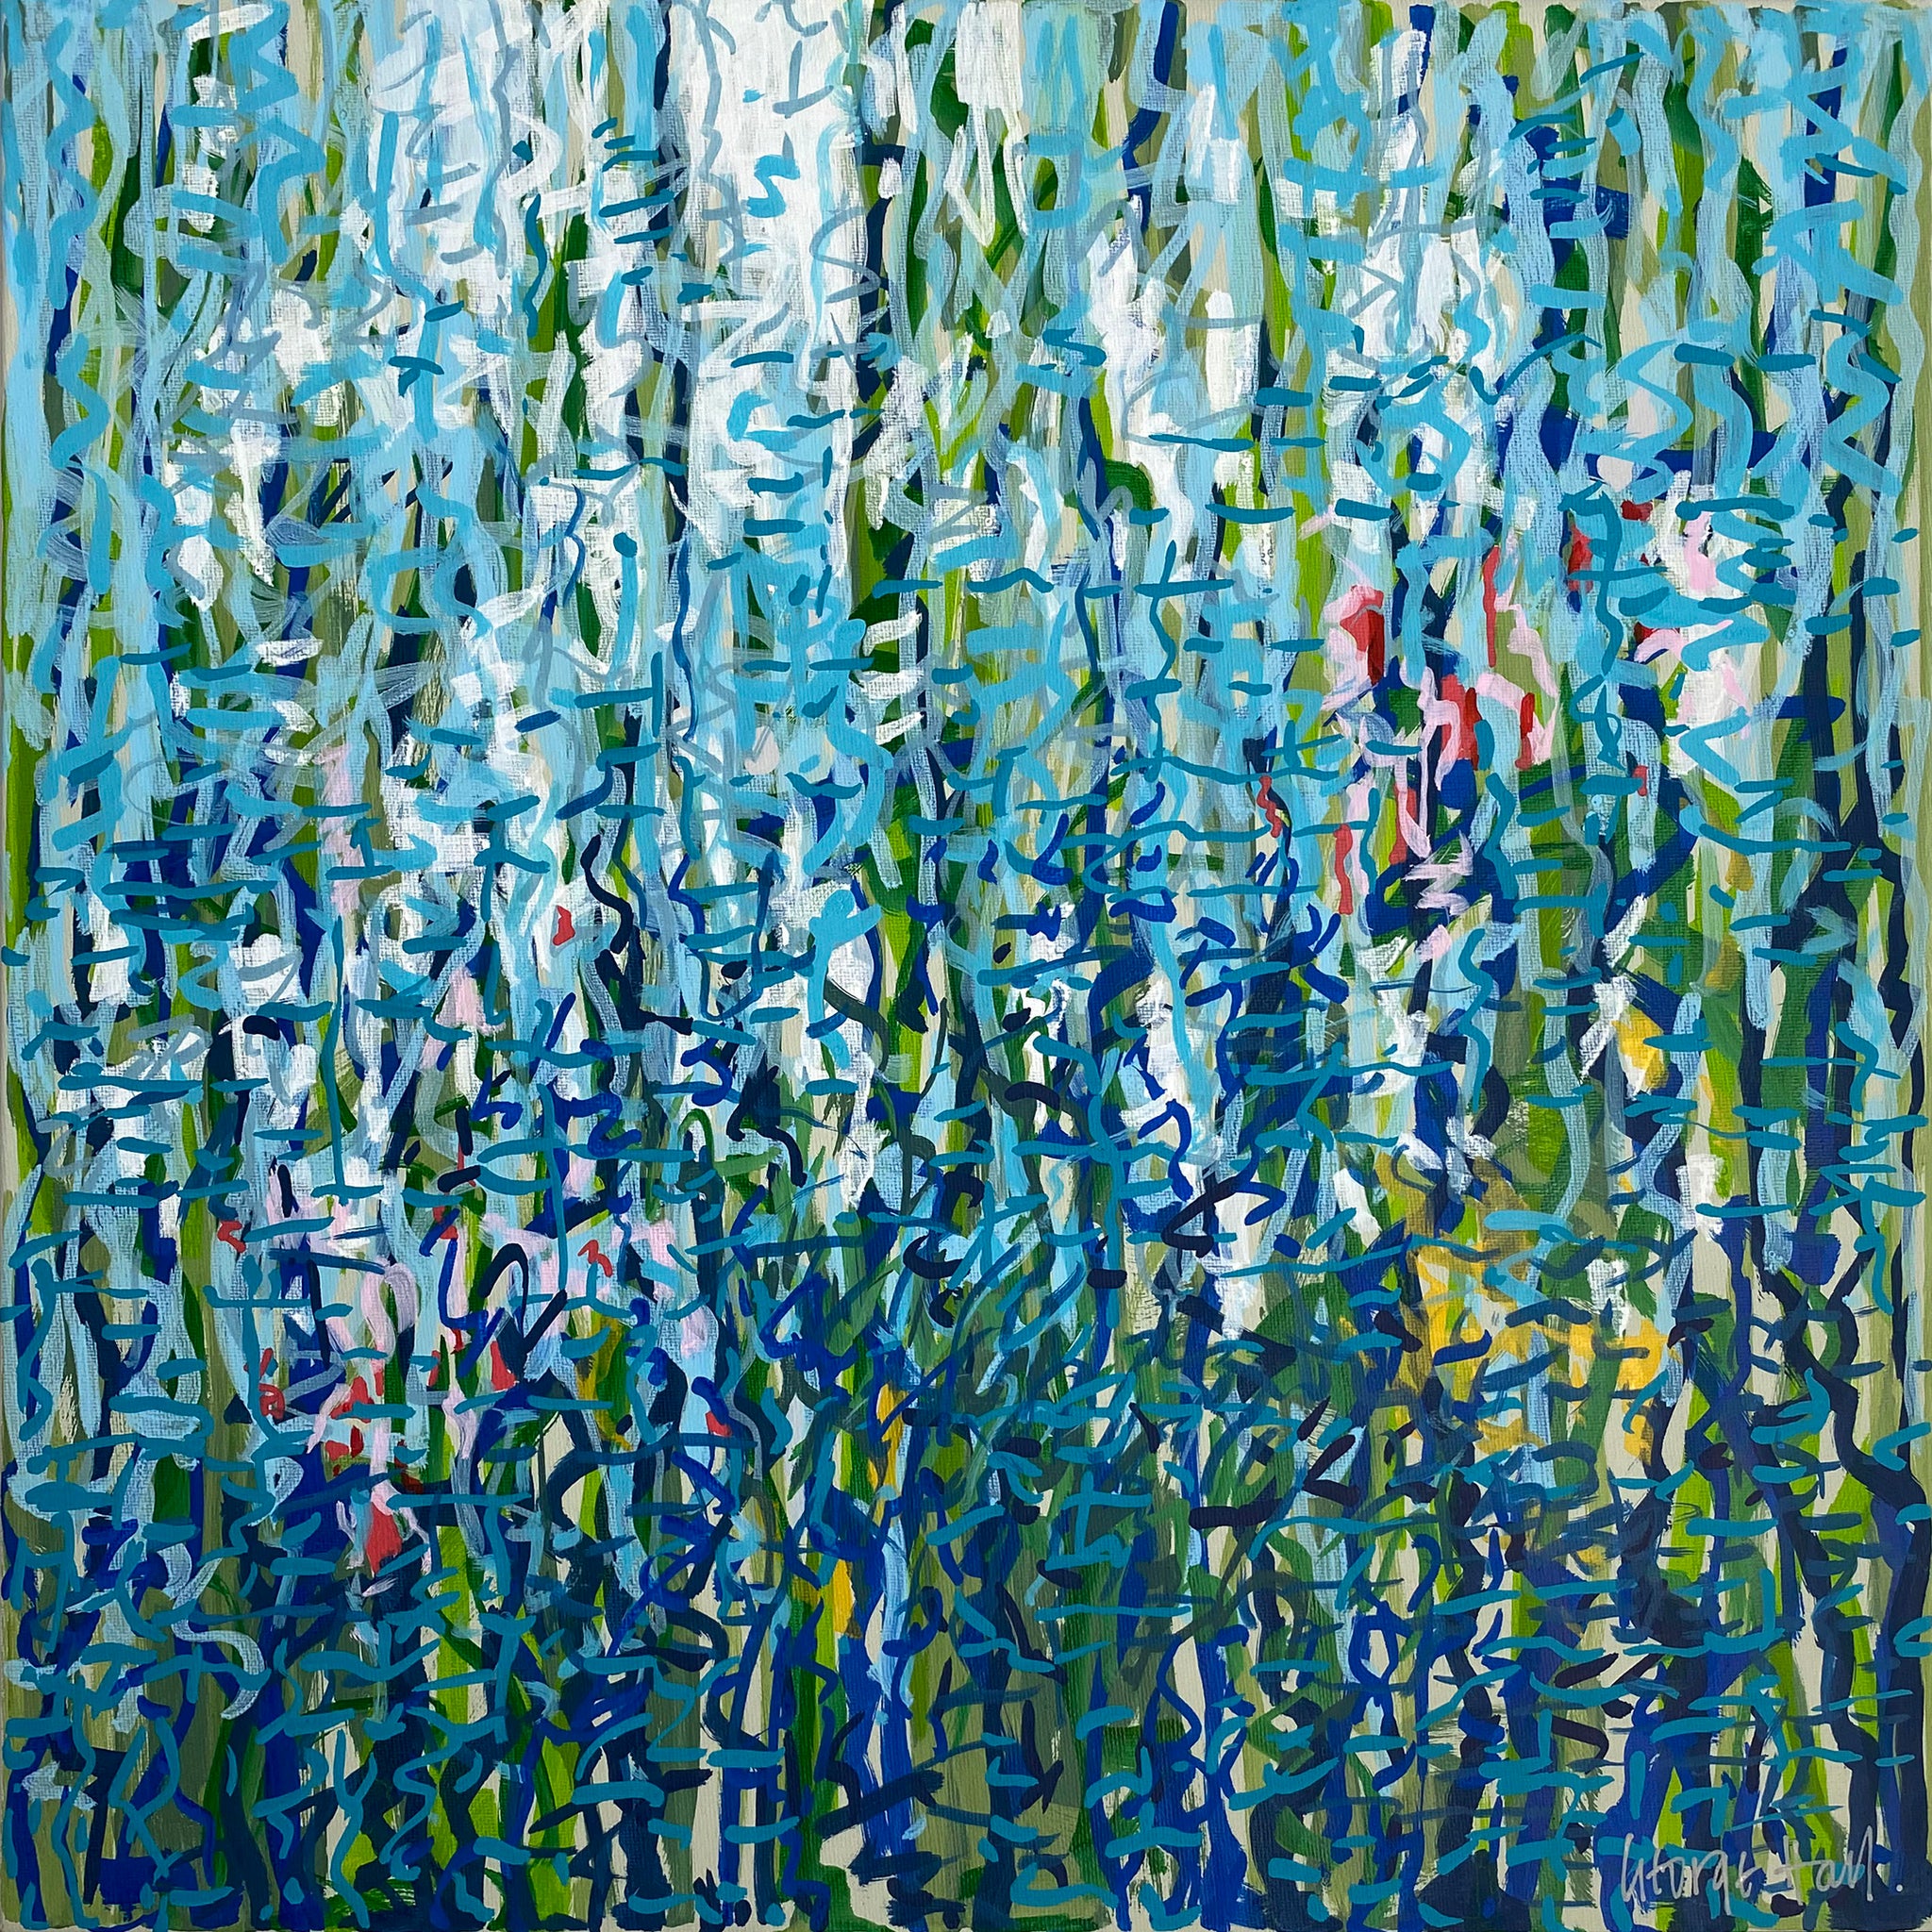 Water Garden 46 x 46 cm acrylic painting on canvas